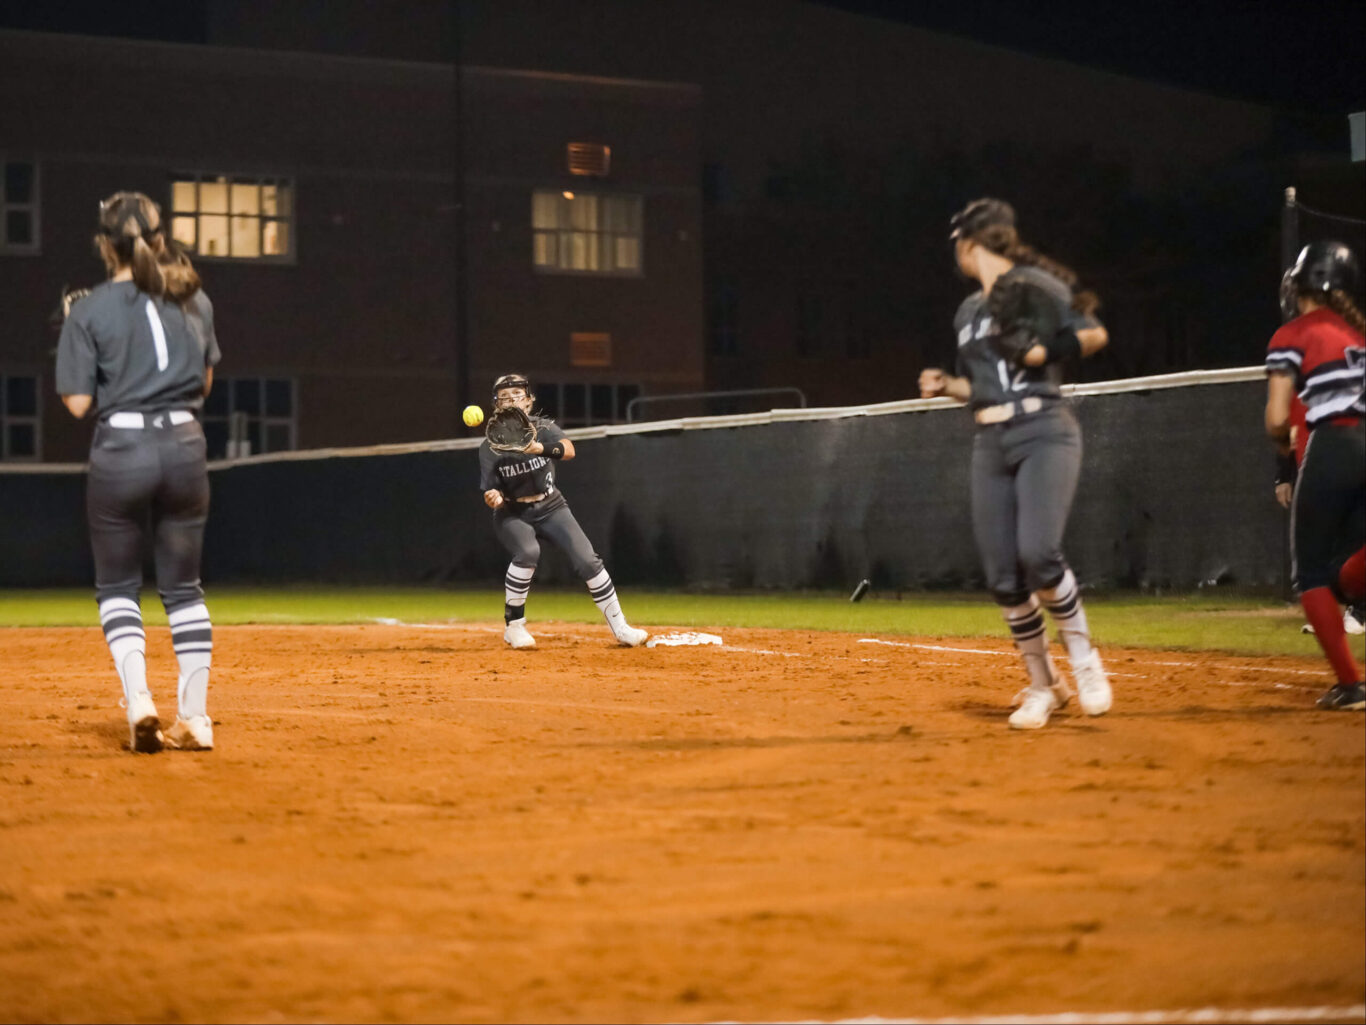 A group of softball girls playing on a field at night.